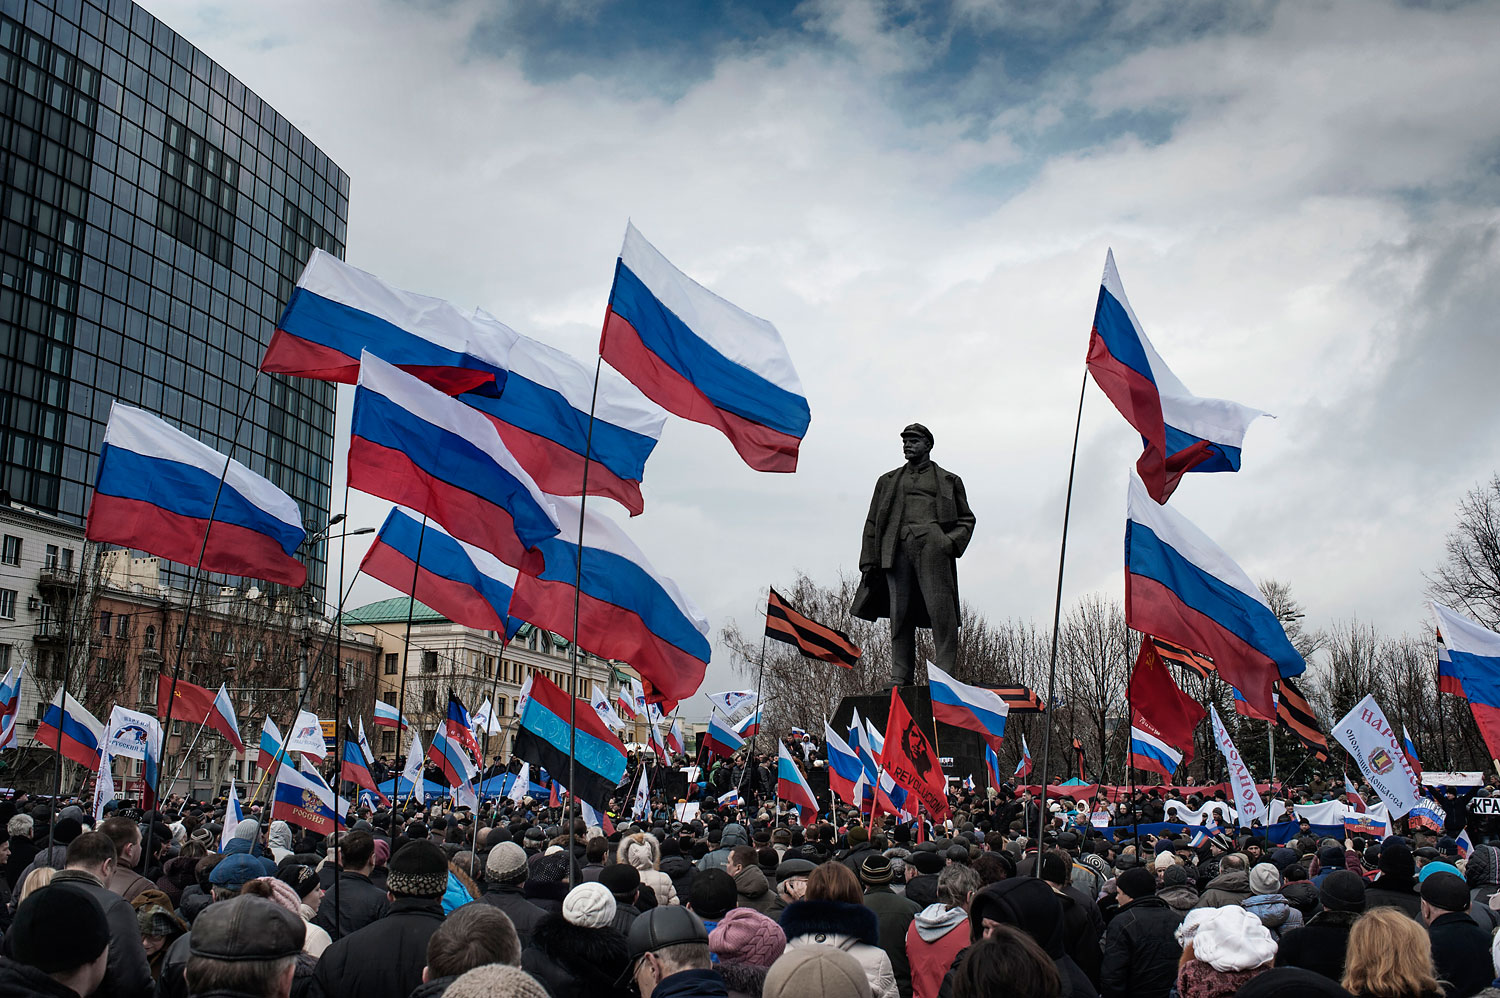 Pro-Russia supporters gather and wave Russian flags in Lenin Square in Donetsk, March 16, 2014. (Alessio Romenzi)